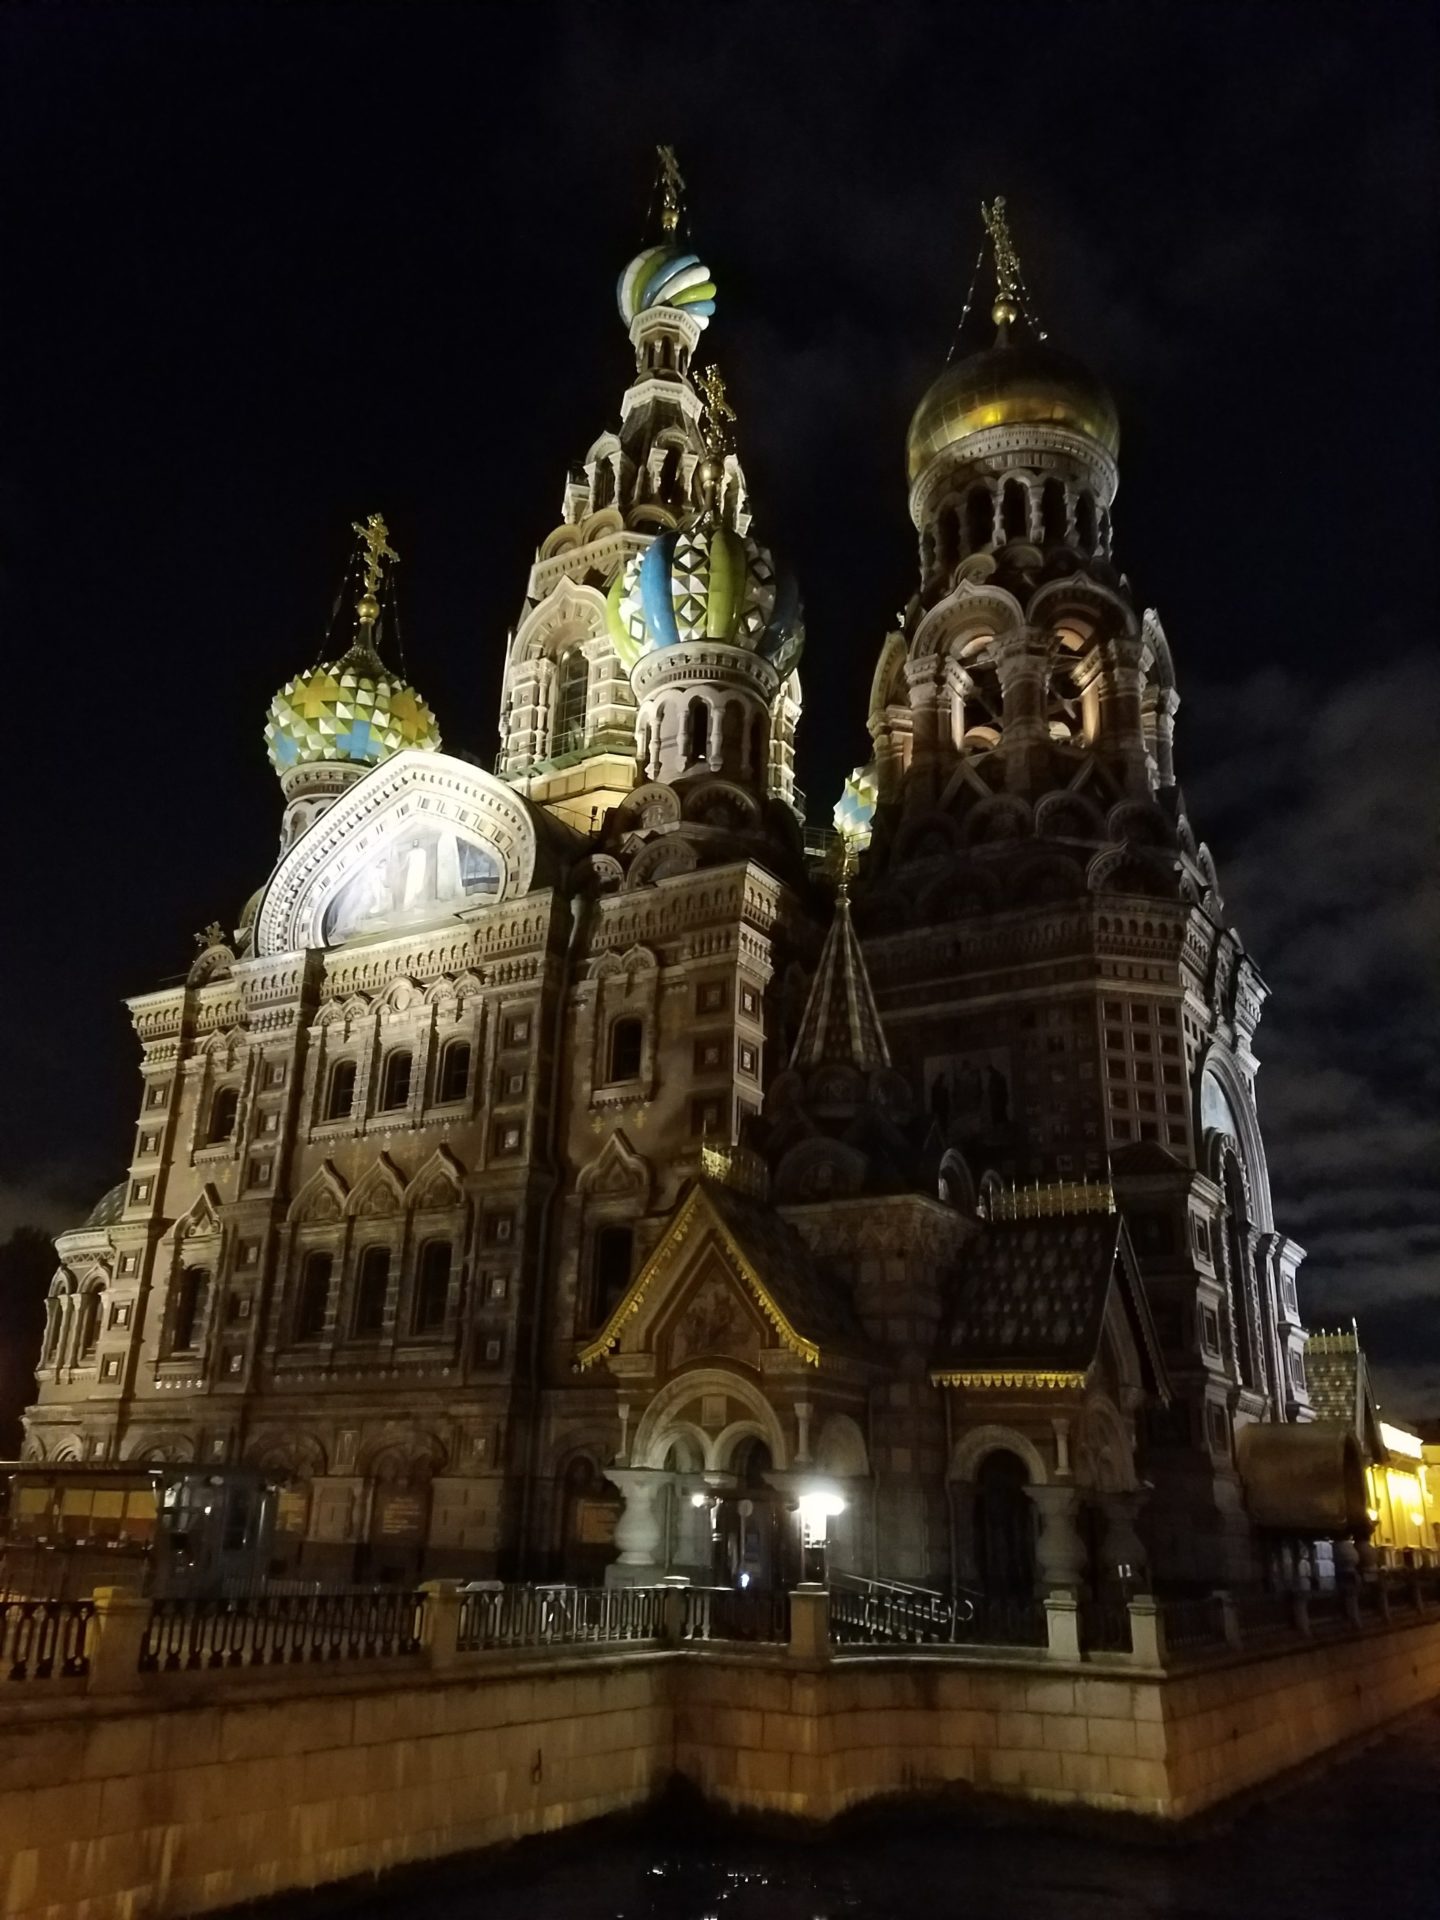 Church of the Savior on Blood with a large dome and gold domes